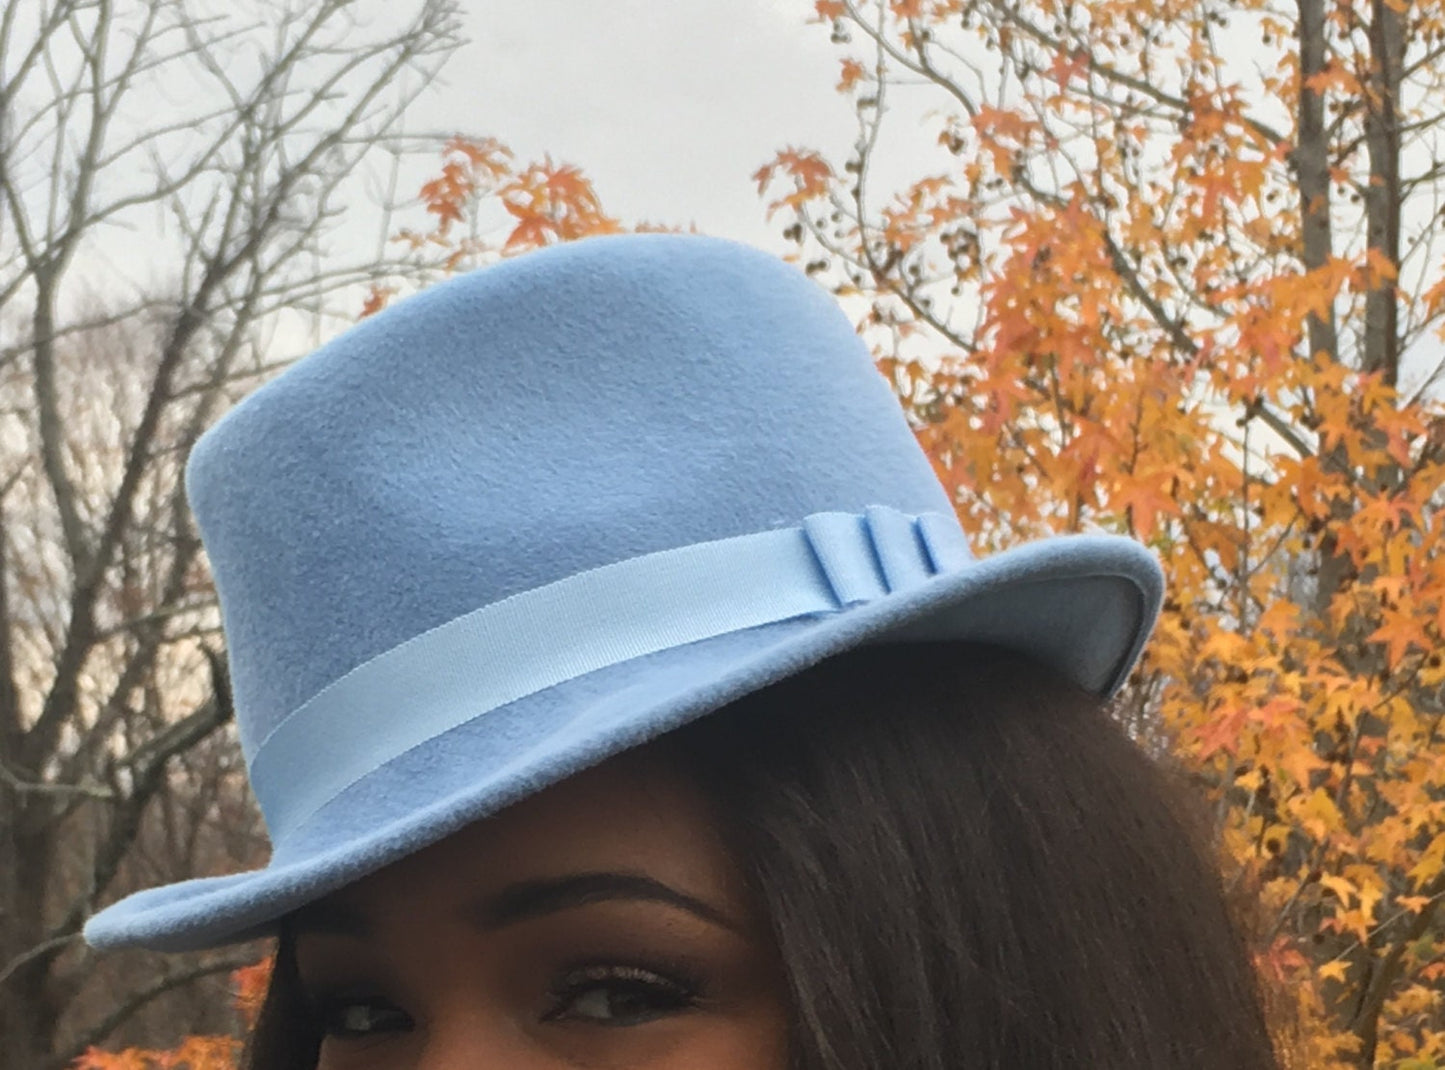 Baby Blue Classic Fedora for Him or Her- UNISEX- runs SMALL in size- 21"- Ideal for young teens and children. Custom colors can be made!